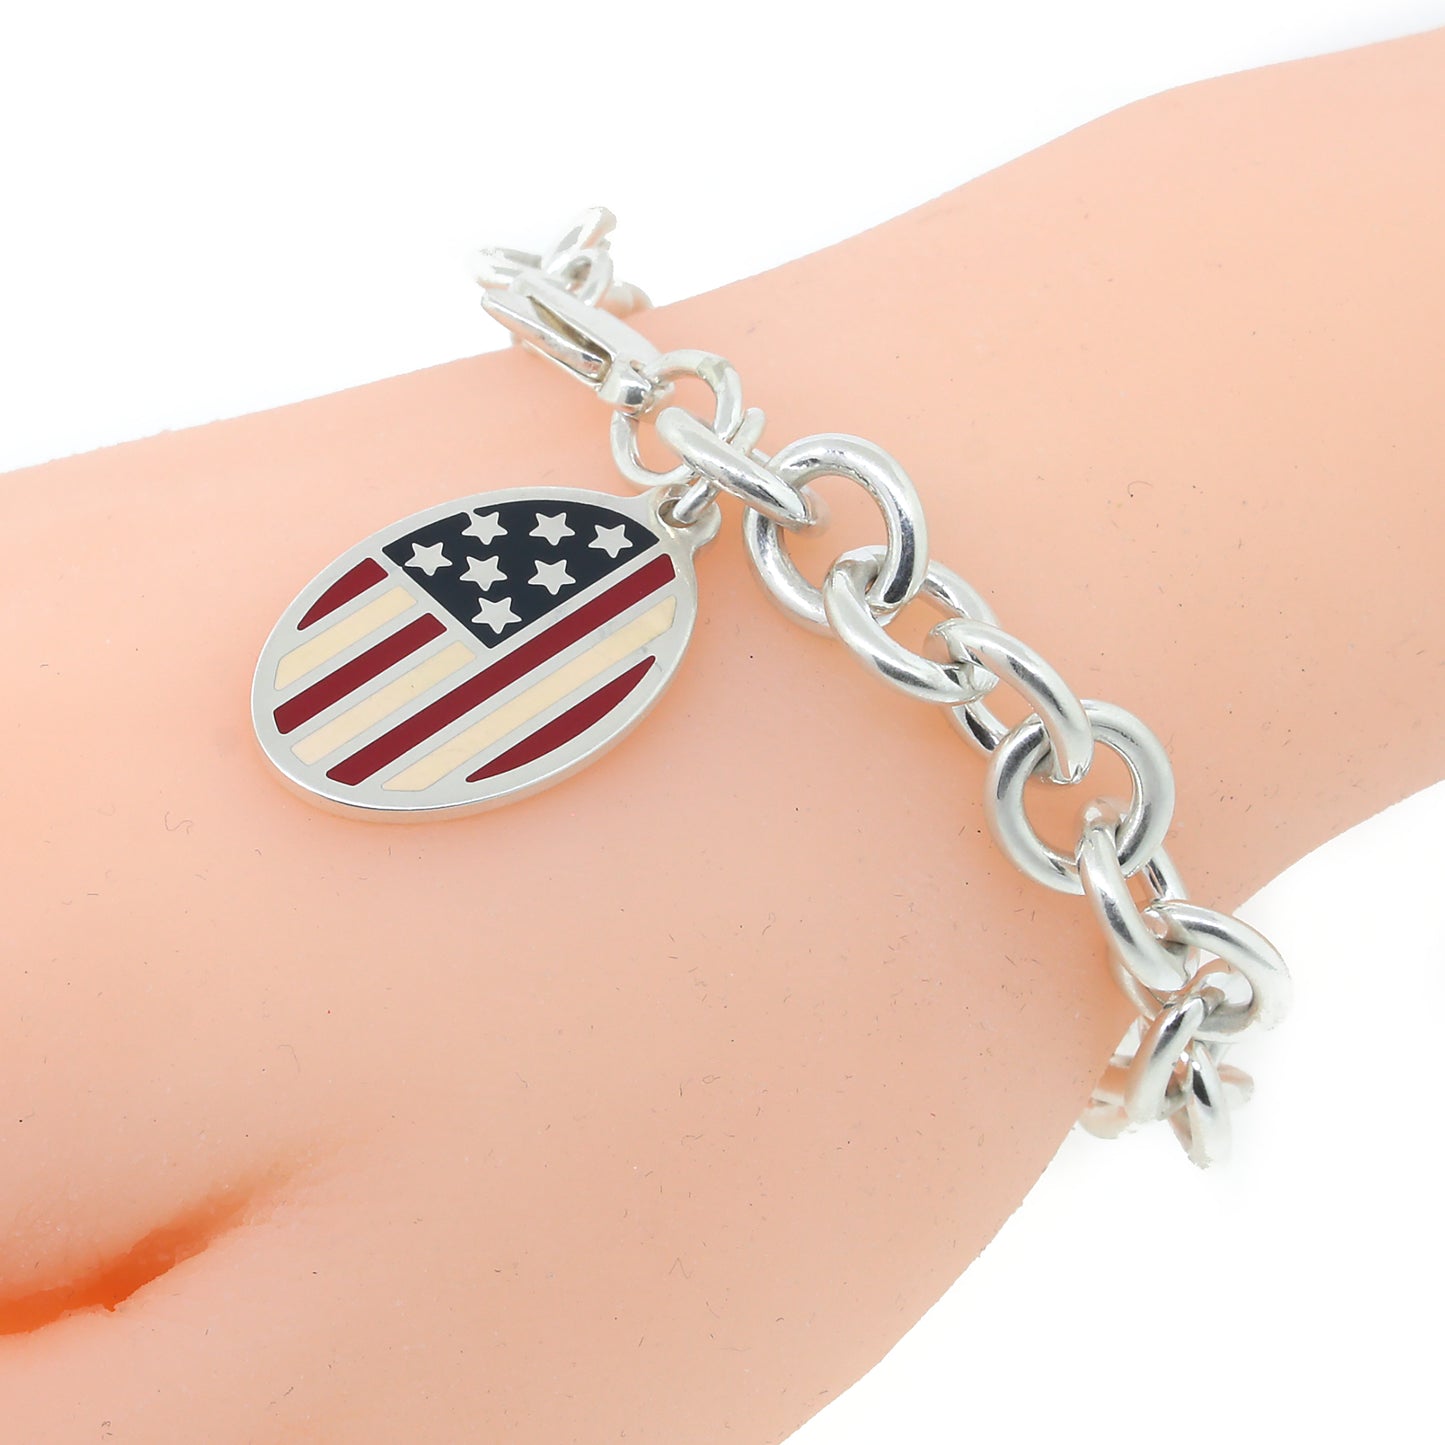 Tiffany and Co. American Flag Sterling Silver Charm Bracelet